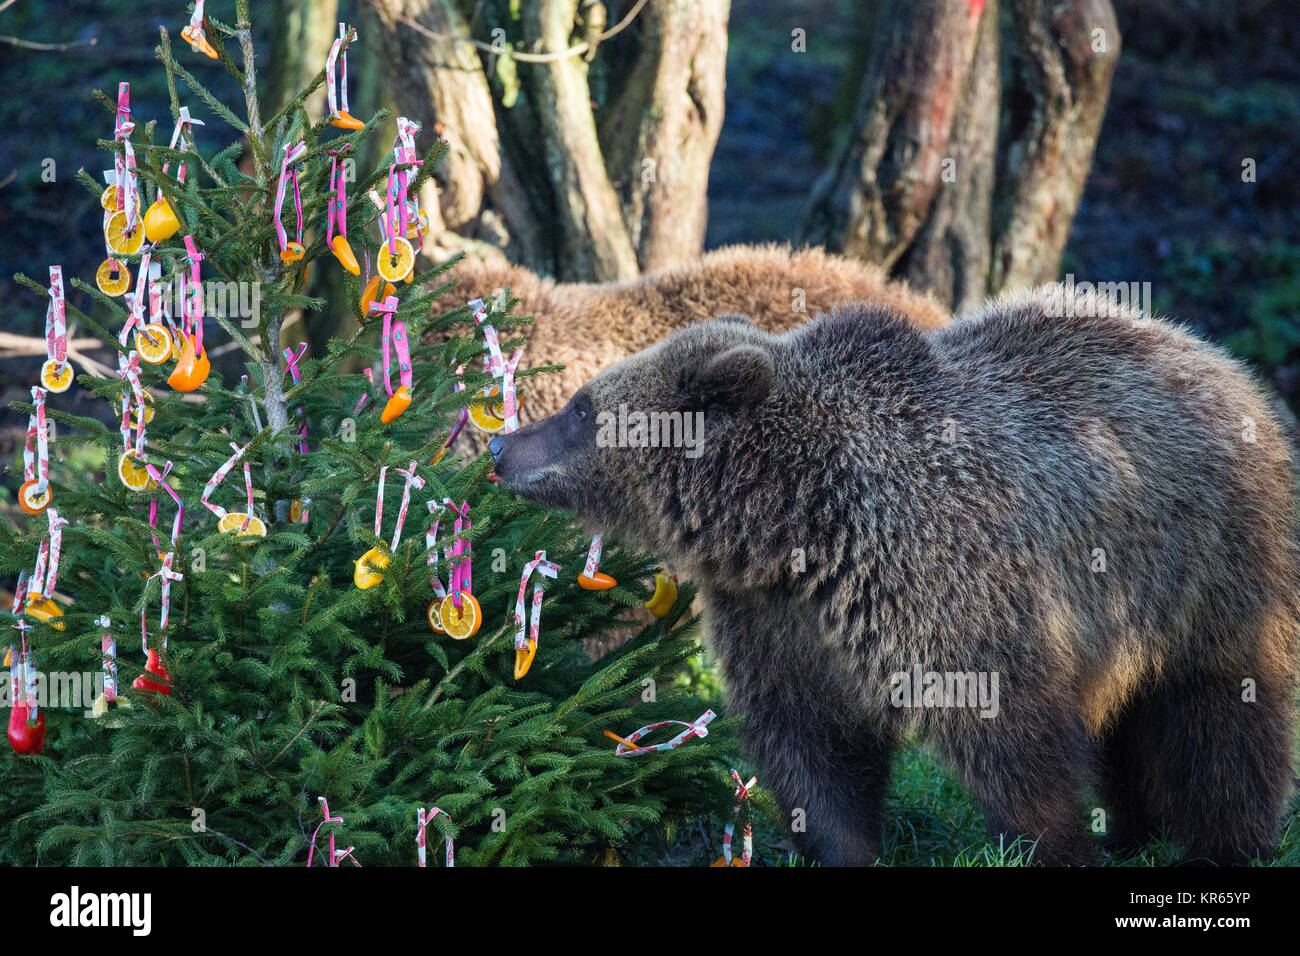 Whipsnade, UK. 19th Dec, 2017. 24-year-old female European brown bear Wellington discovers festive surprises in the form of Christmas tree baubles made of colourful peppers, pineapple rings and slices of orange during the annual Christmas photocall at ZSL Whipsnade Zoo. Credit: Mark Kerrison/Alamy Live News Stock Photo